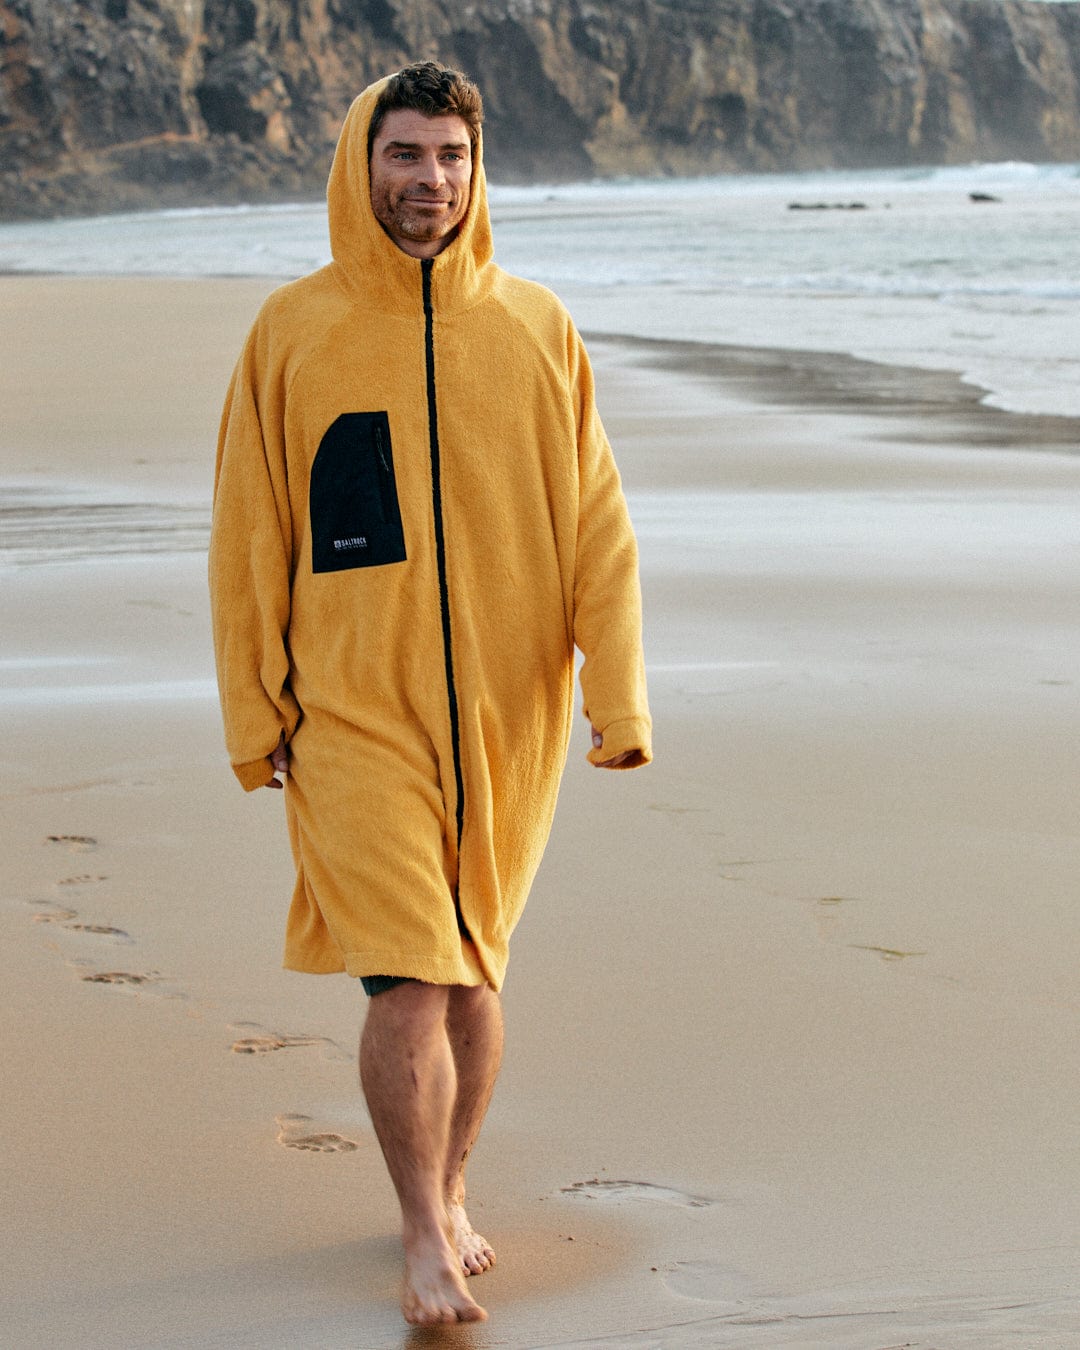 Man in a Saltrock 3 in 1 Recycled Four Seasons Changing Robe - Black/Yellow walking on a sandy beach with ocean waves in the background.